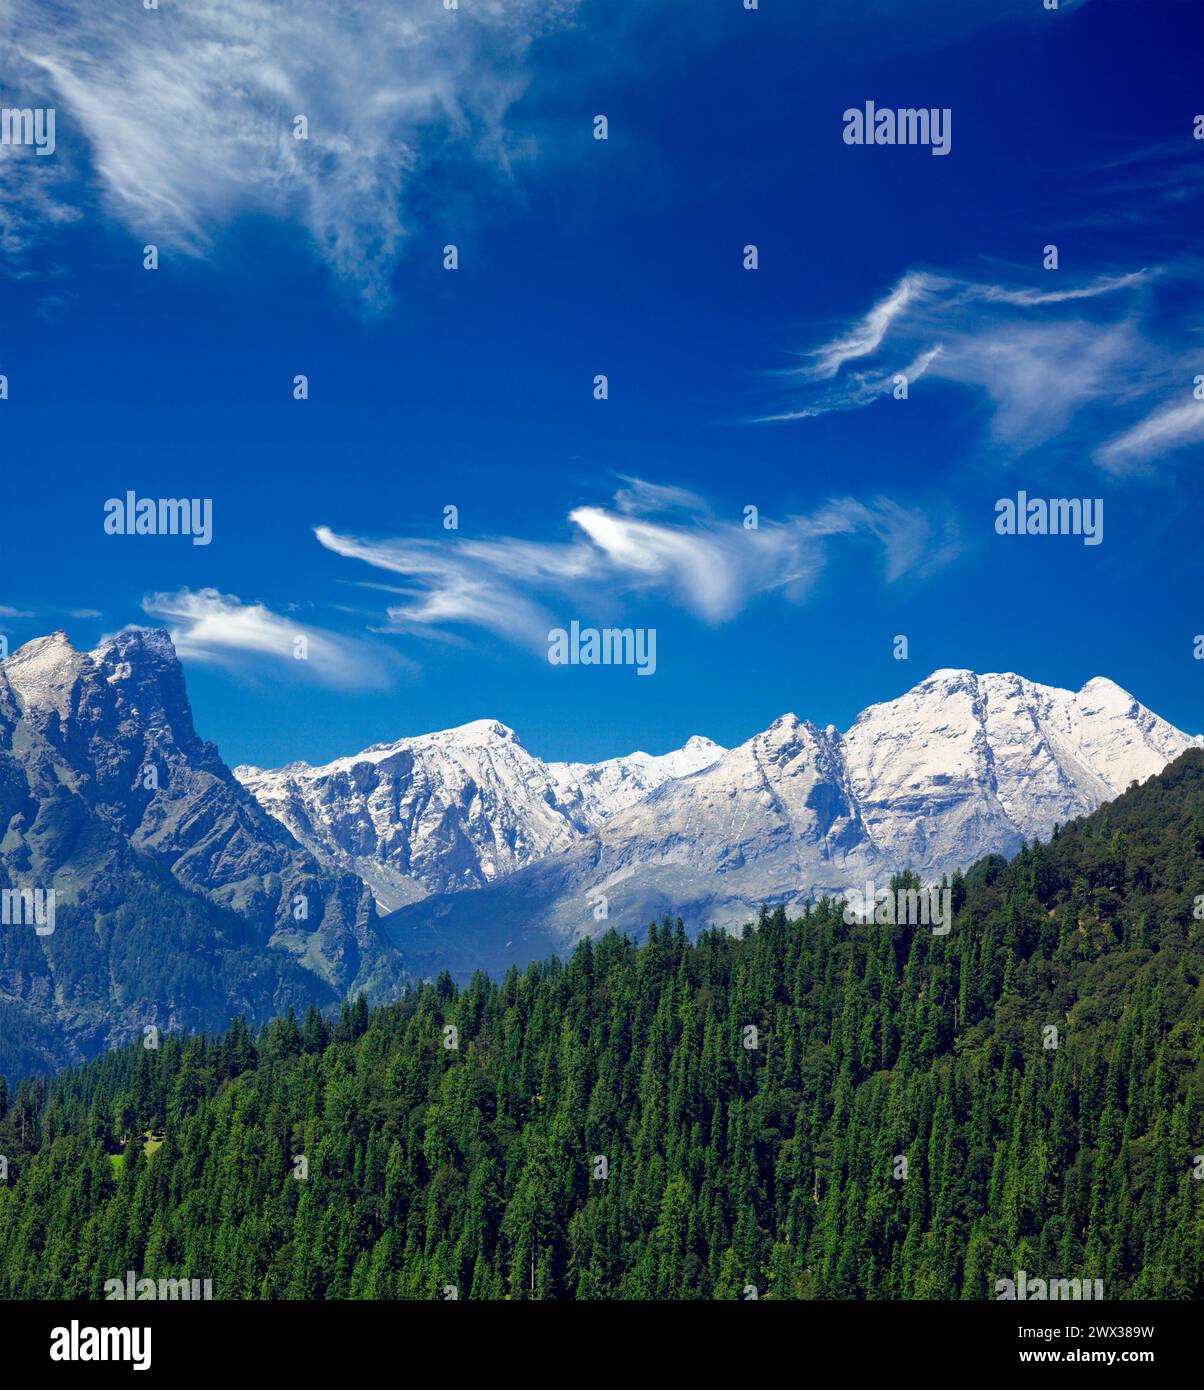 Himalayas and forest. India Stock Photo